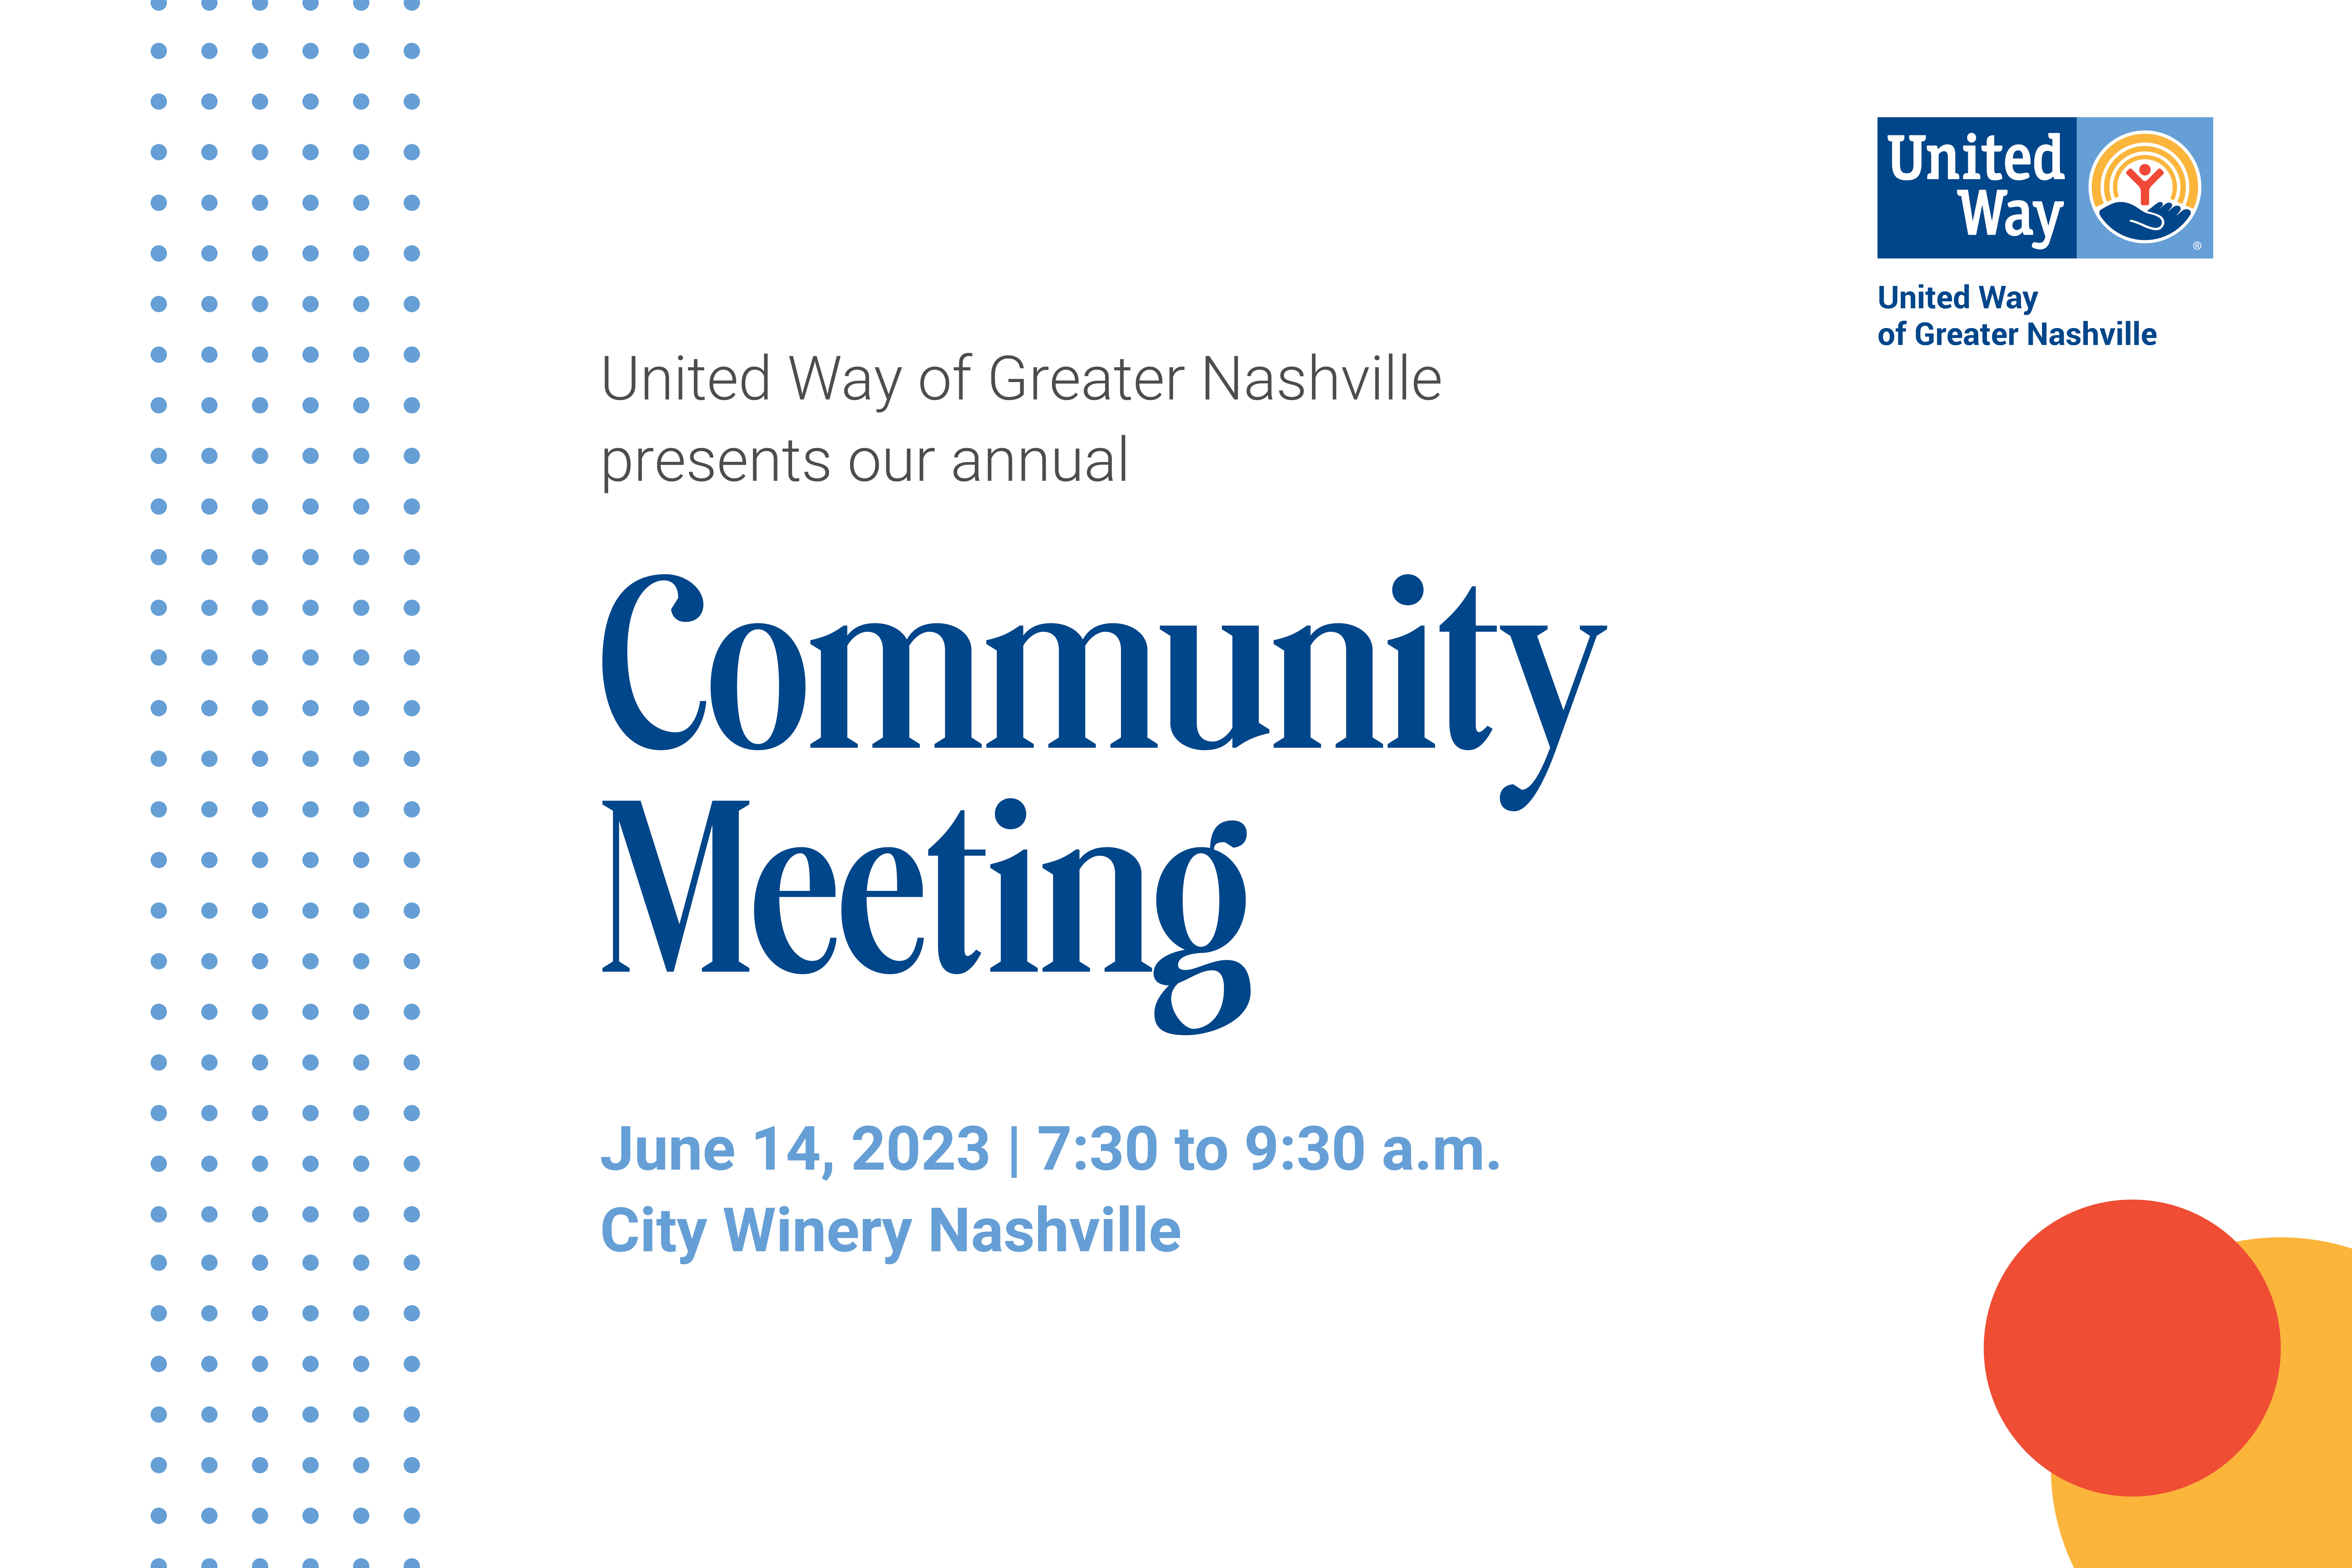 Annual Meeting graphic